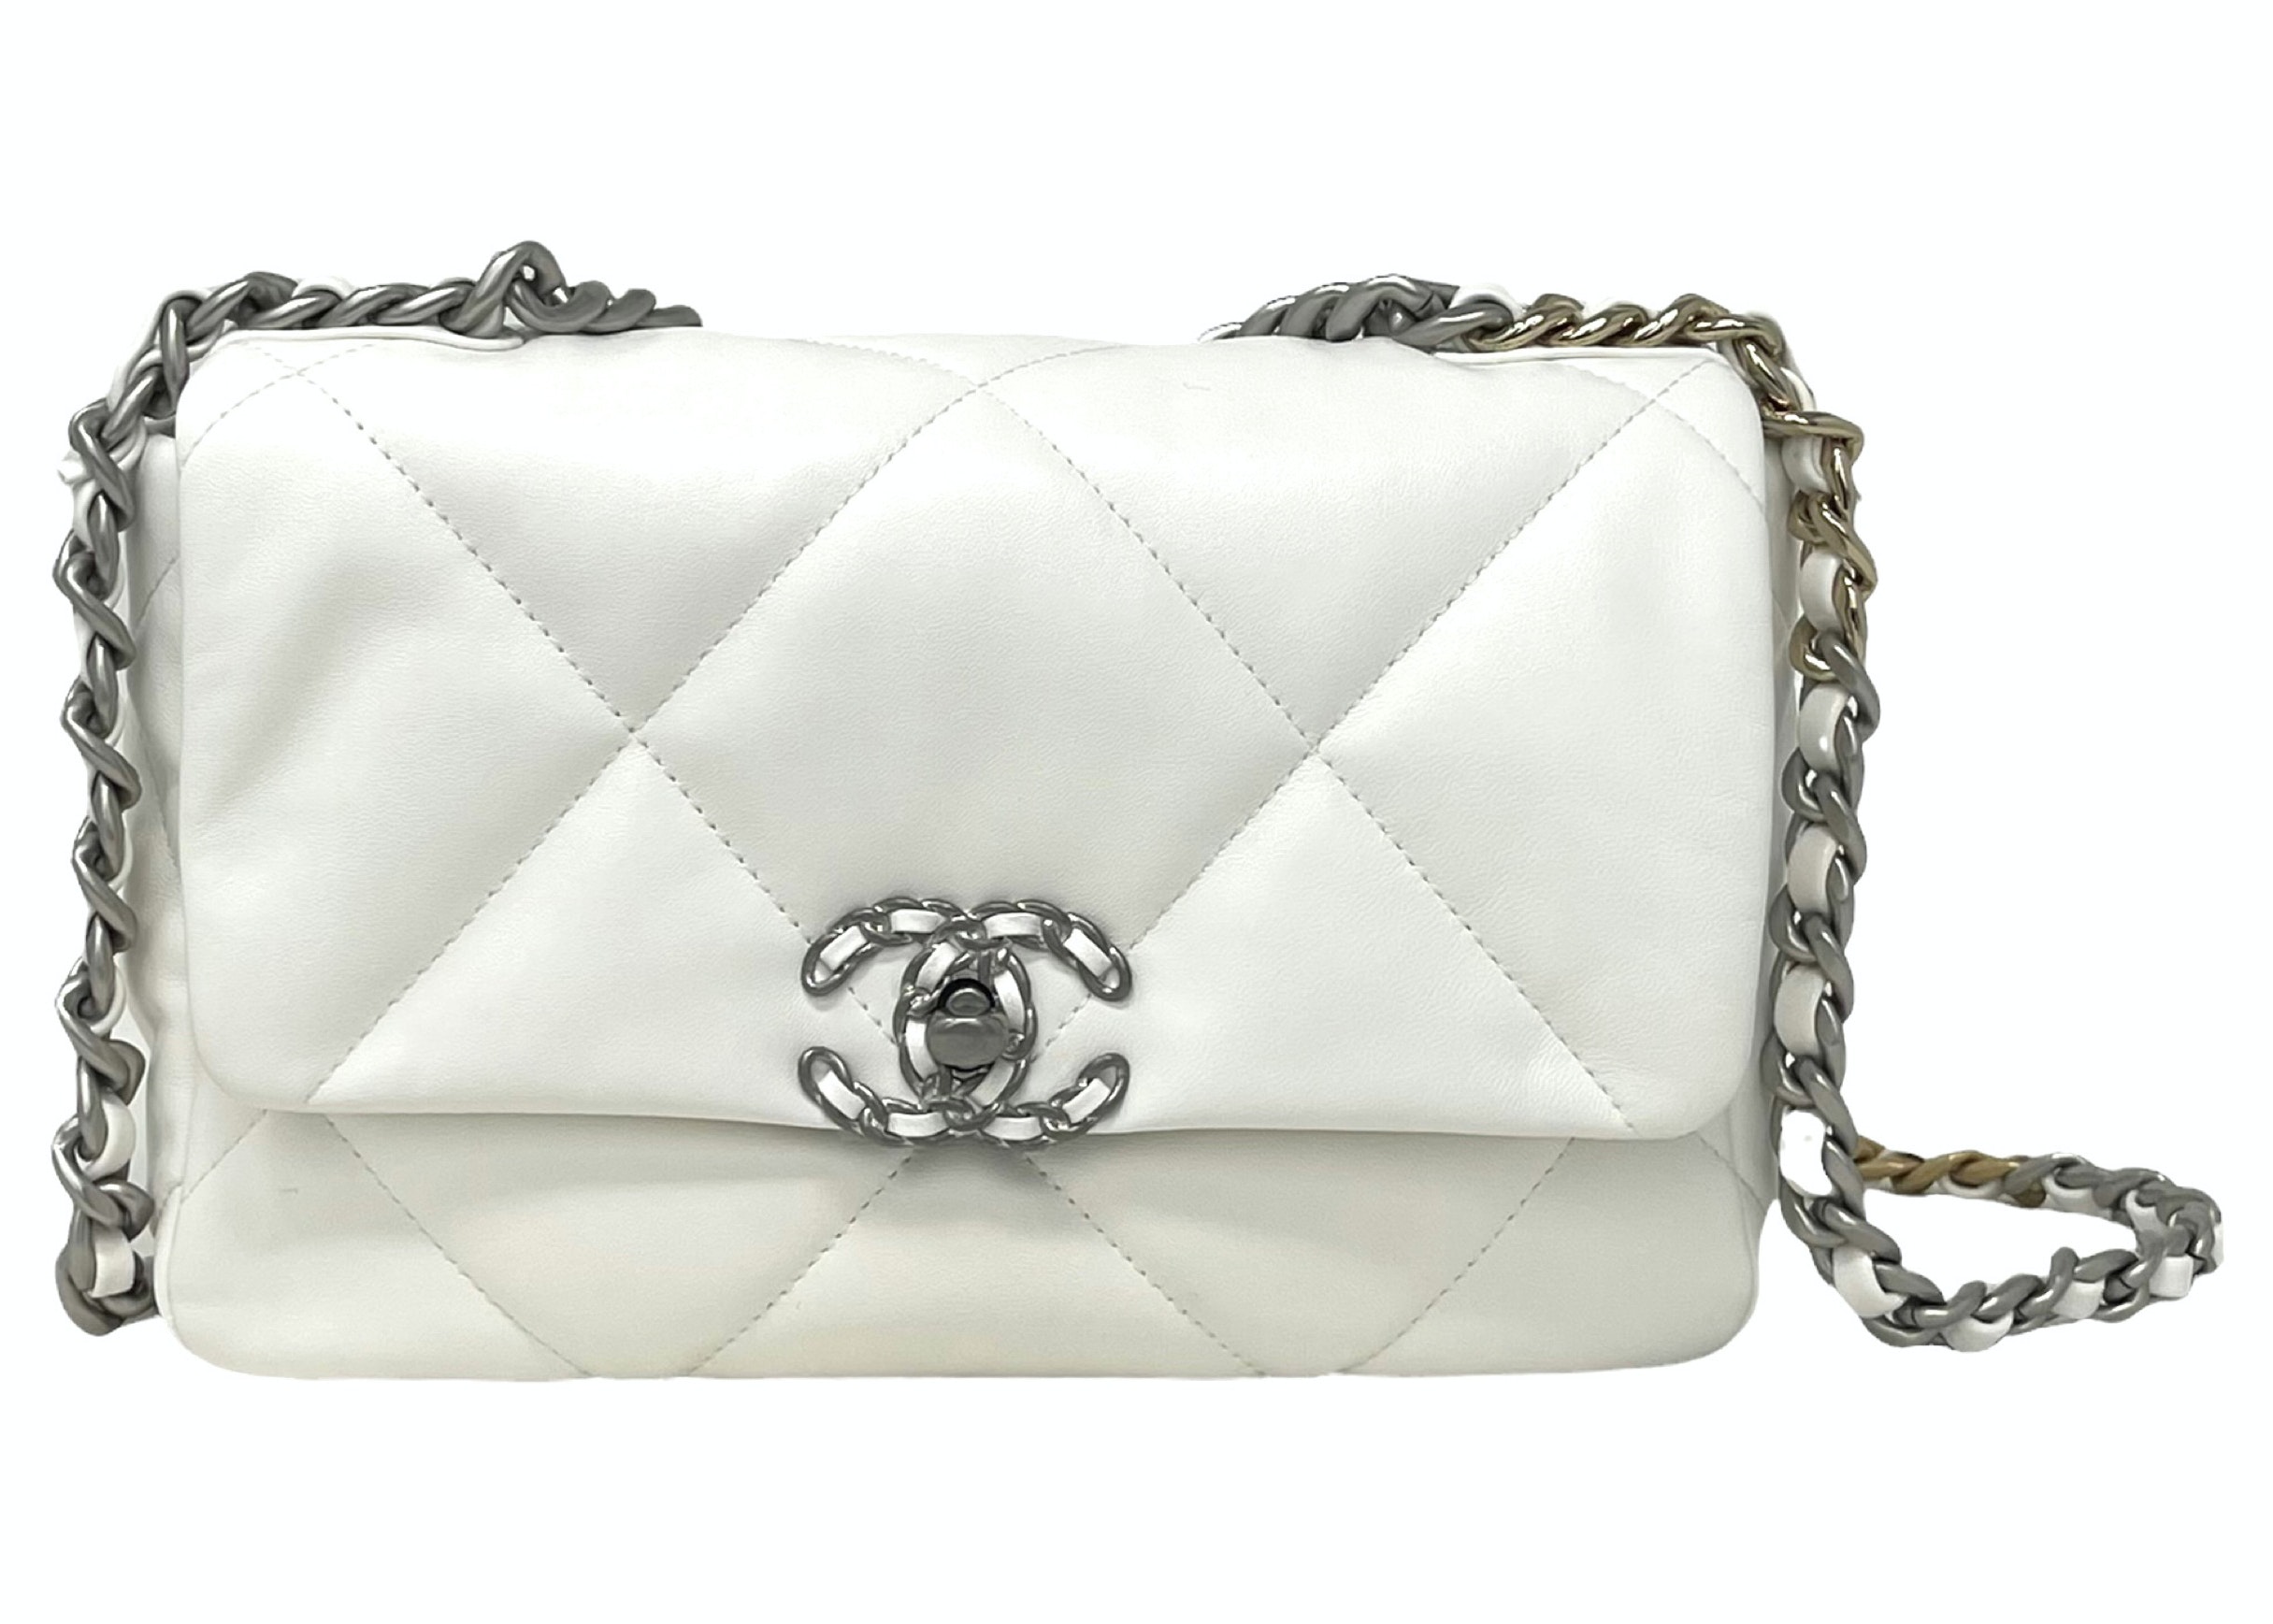 White Chanel Bag Stock Photo  Download Image Now  Chanel  Designer  Label Bag Chain  Object  iStock